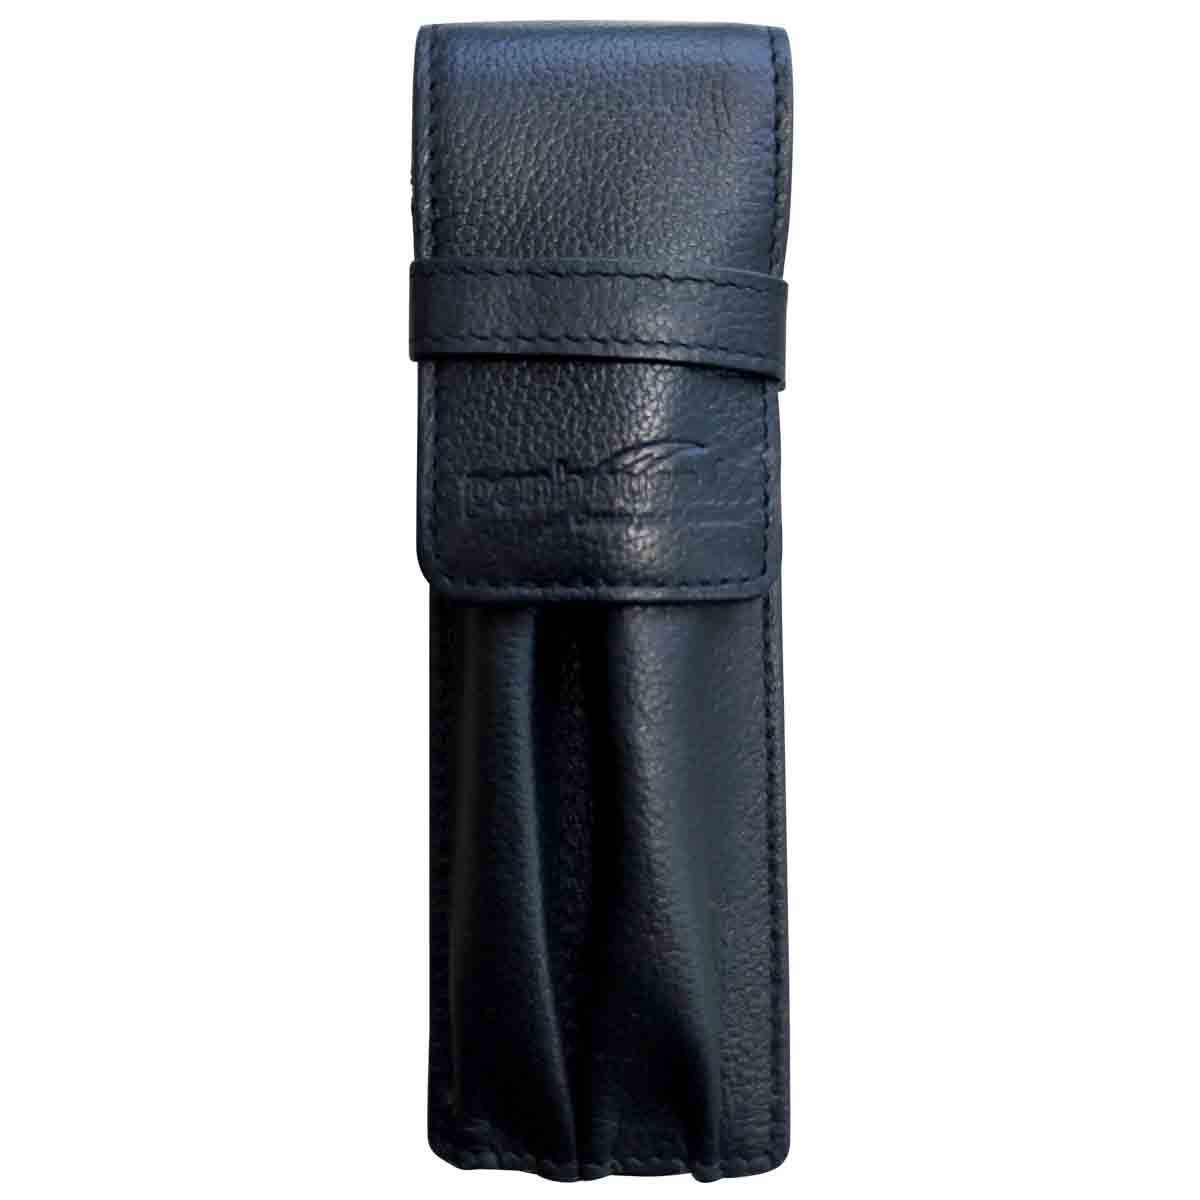 Two Pen Premium Leather Pen Holder - One Slot for Big Pen and another Slot for Medium Pen Model 18981